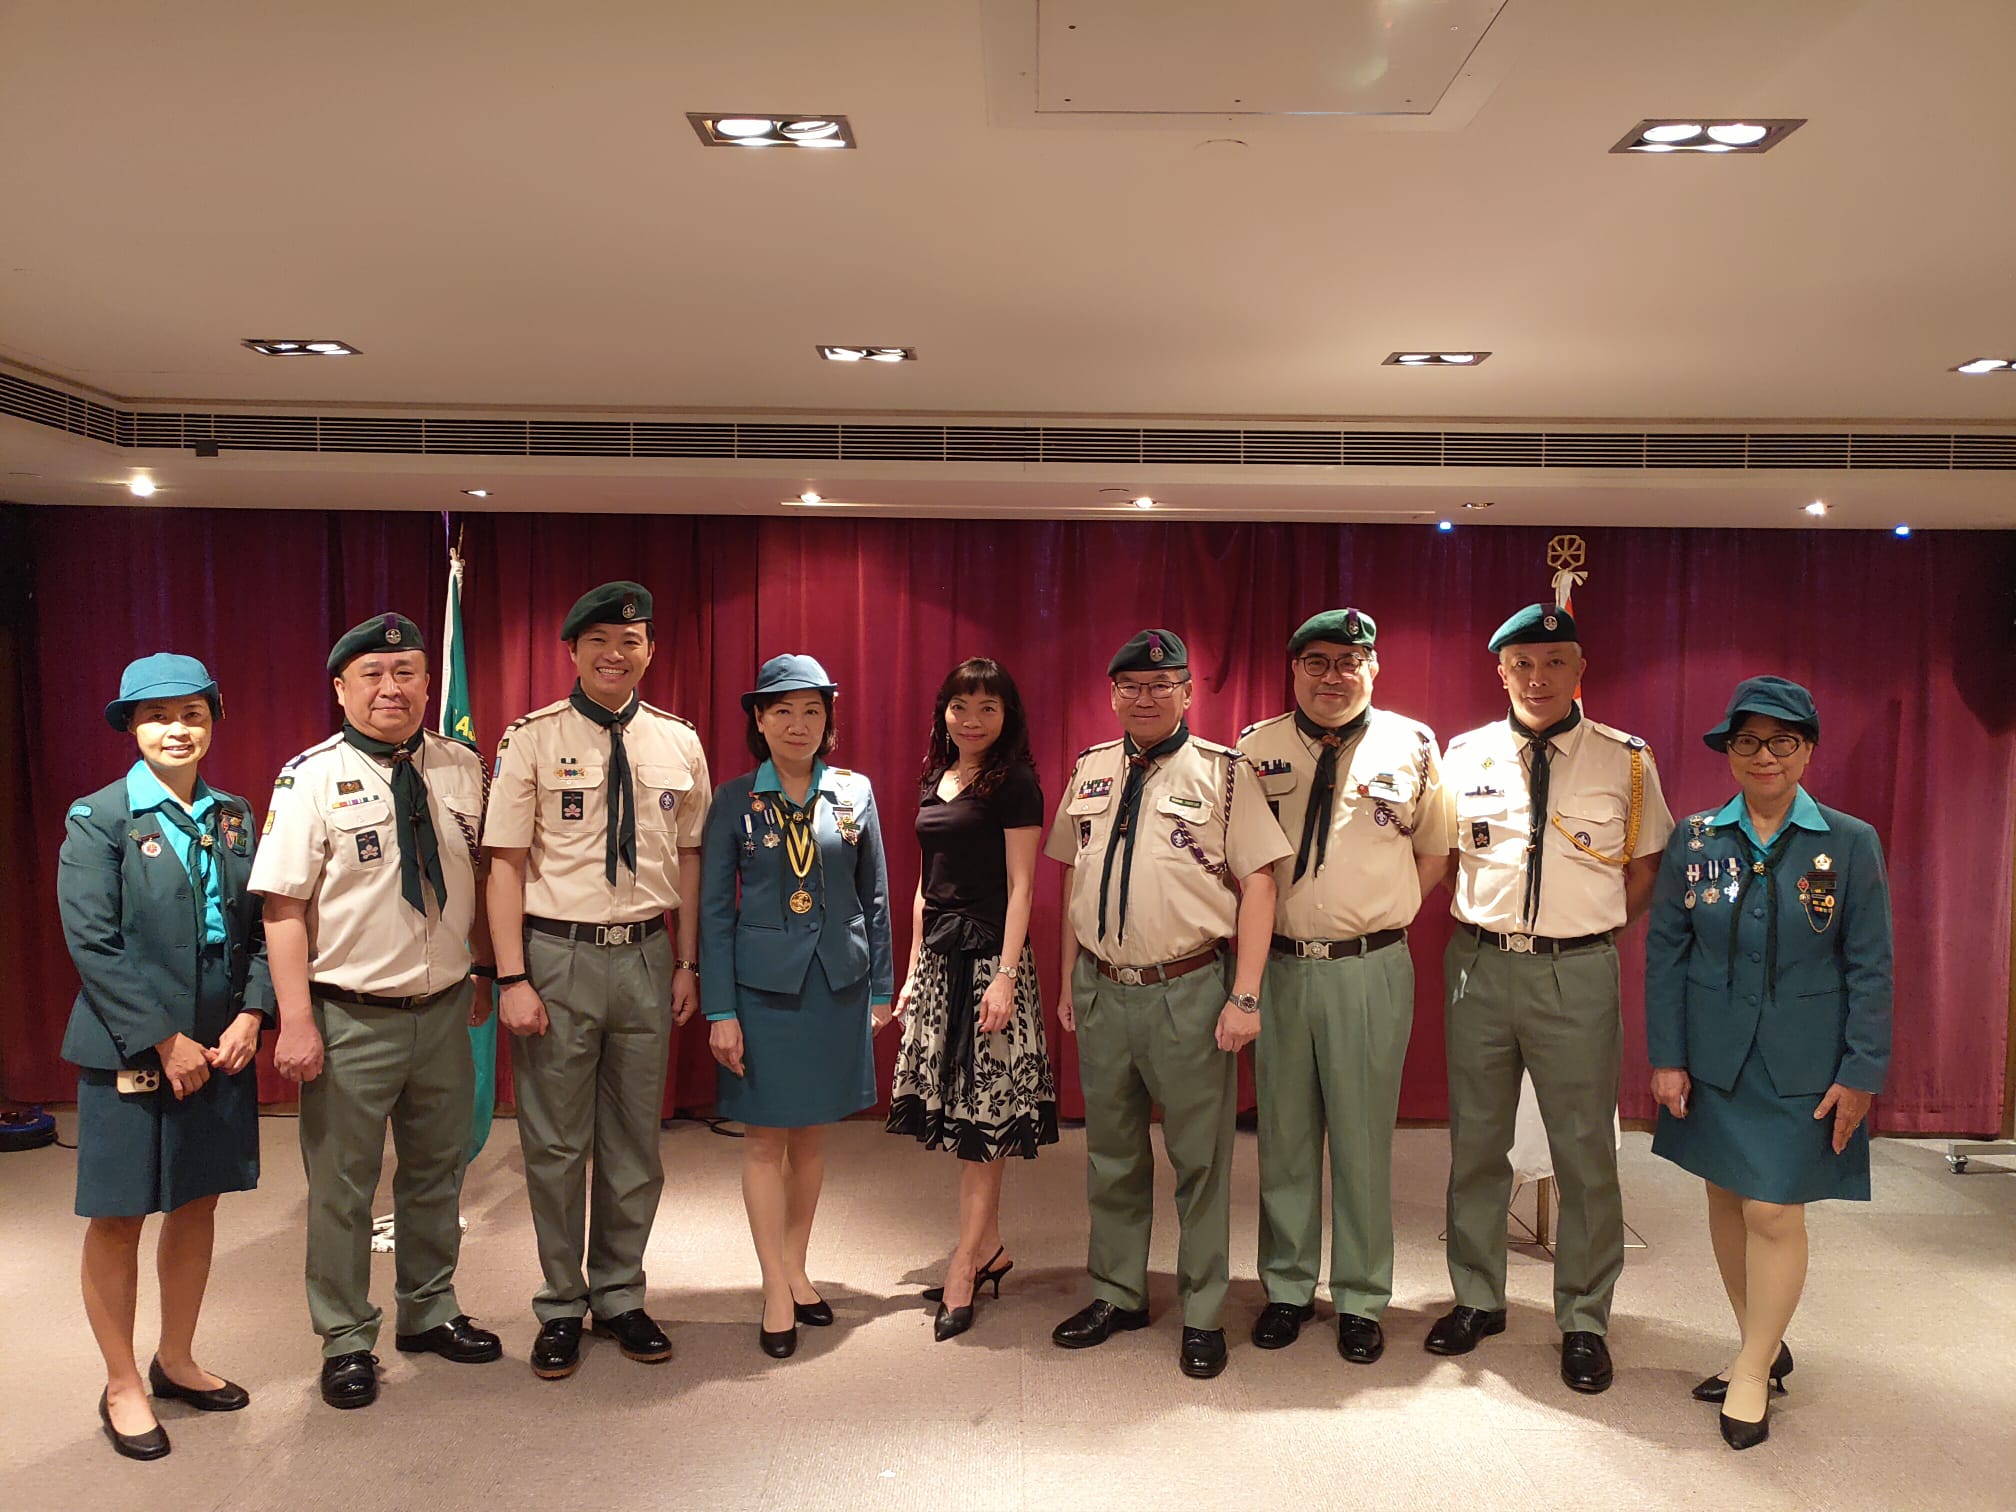 photo with Scout Association members